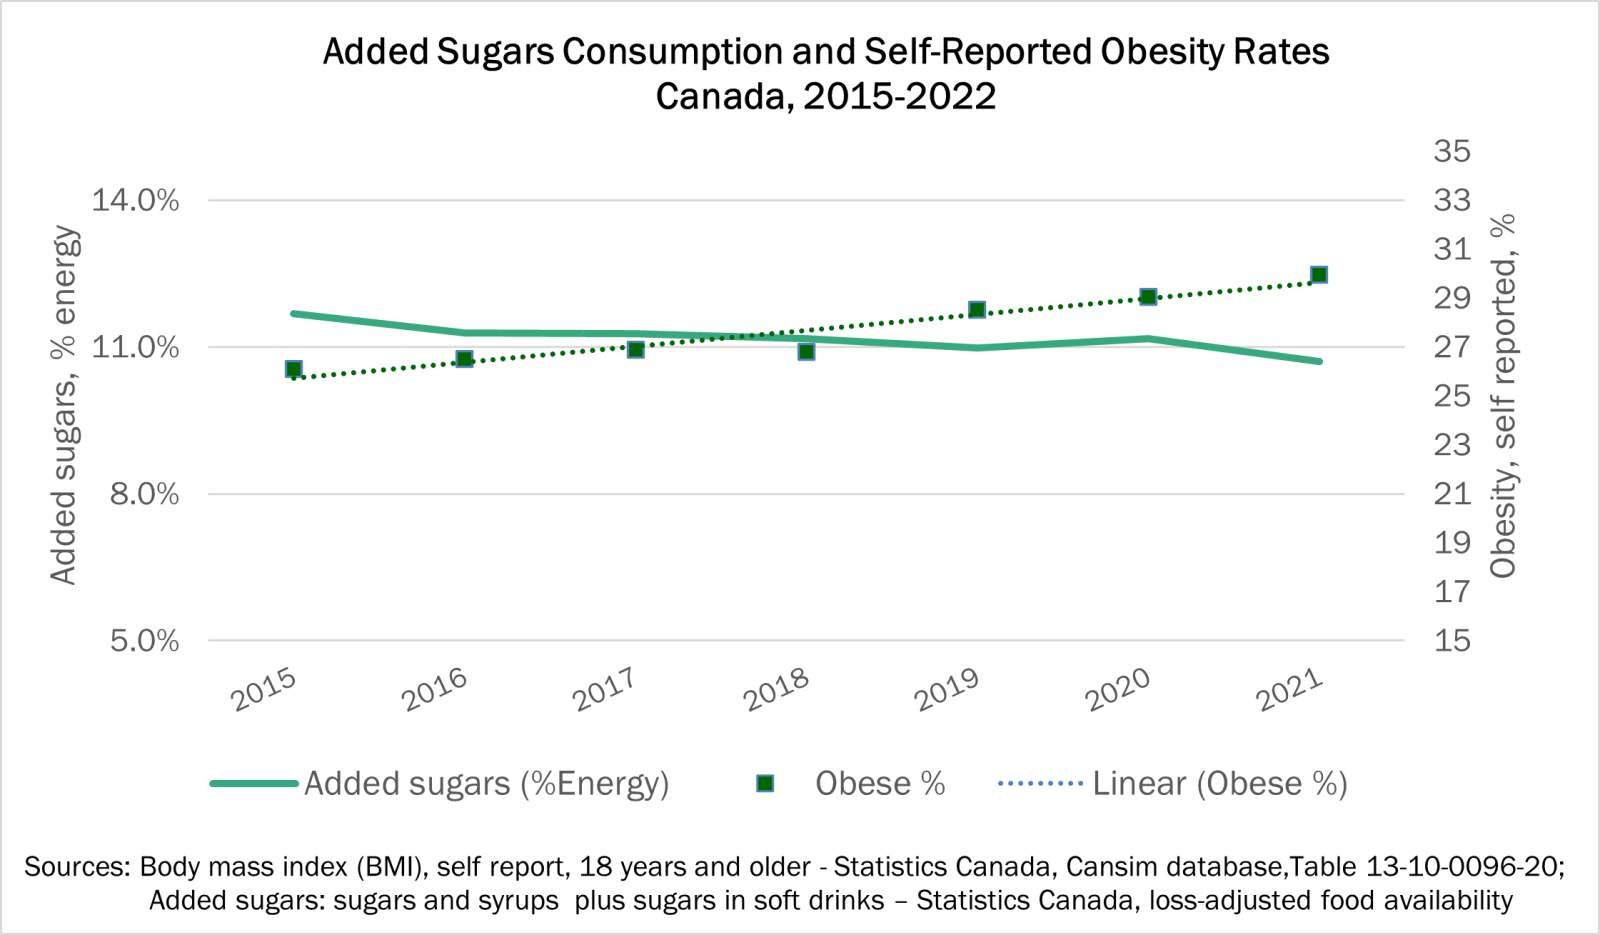 Added sugars consumption has been falling while obesity rates rise in Canada